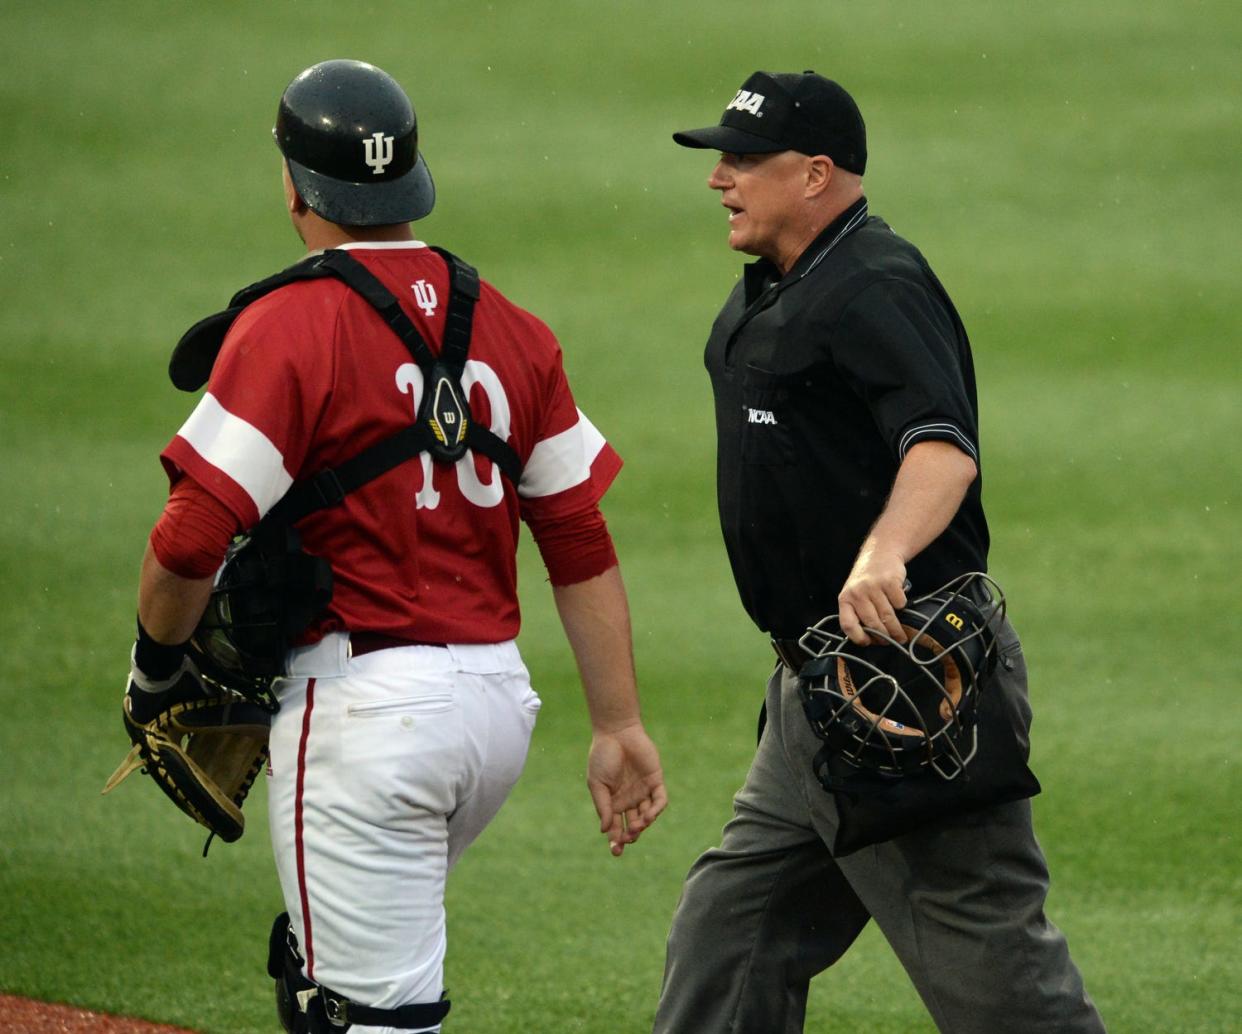 The home plate umpire asks Indiana catcher Kyle Schwarber (10) to get back home after he slapped first base disputing the call during the Stanford Indiana NCAA Baseball Regional at Bart Kaufman Field in Bloomington, Ind. Sunday, June 1, 2014.